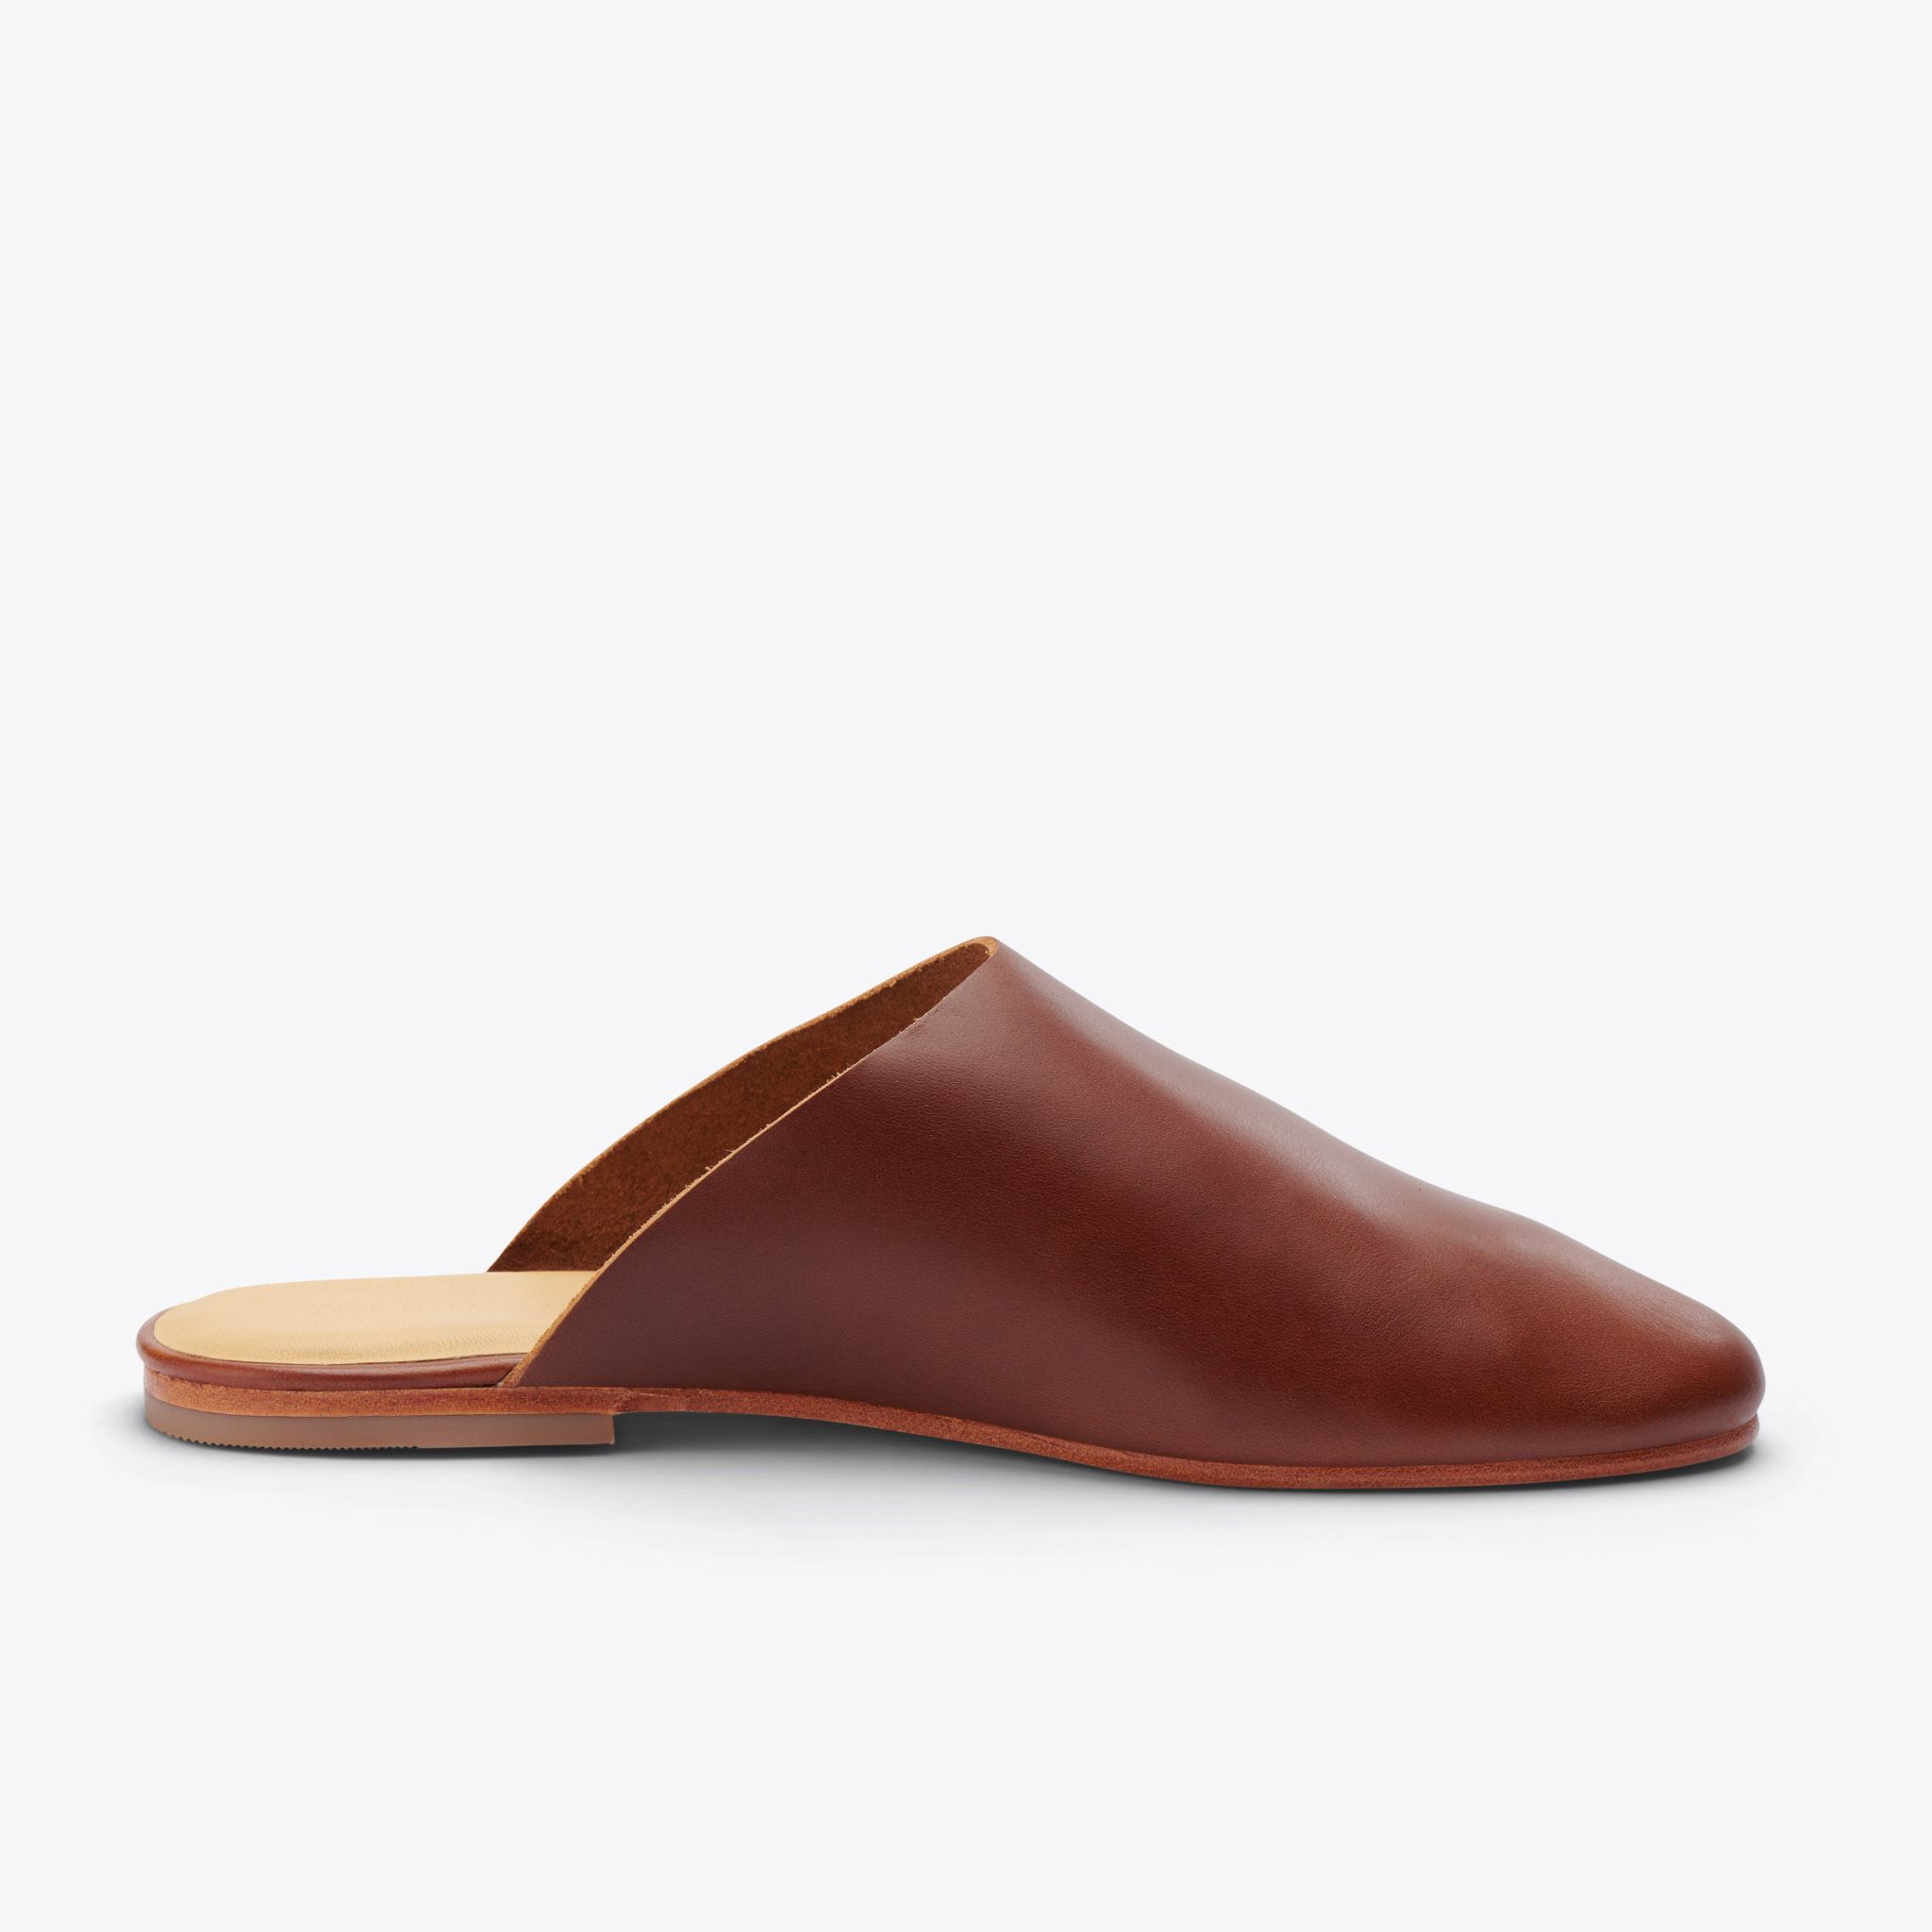 Product Image 3 of the Lima Slip On Brandy Women's Leather Slip On Nisolo 